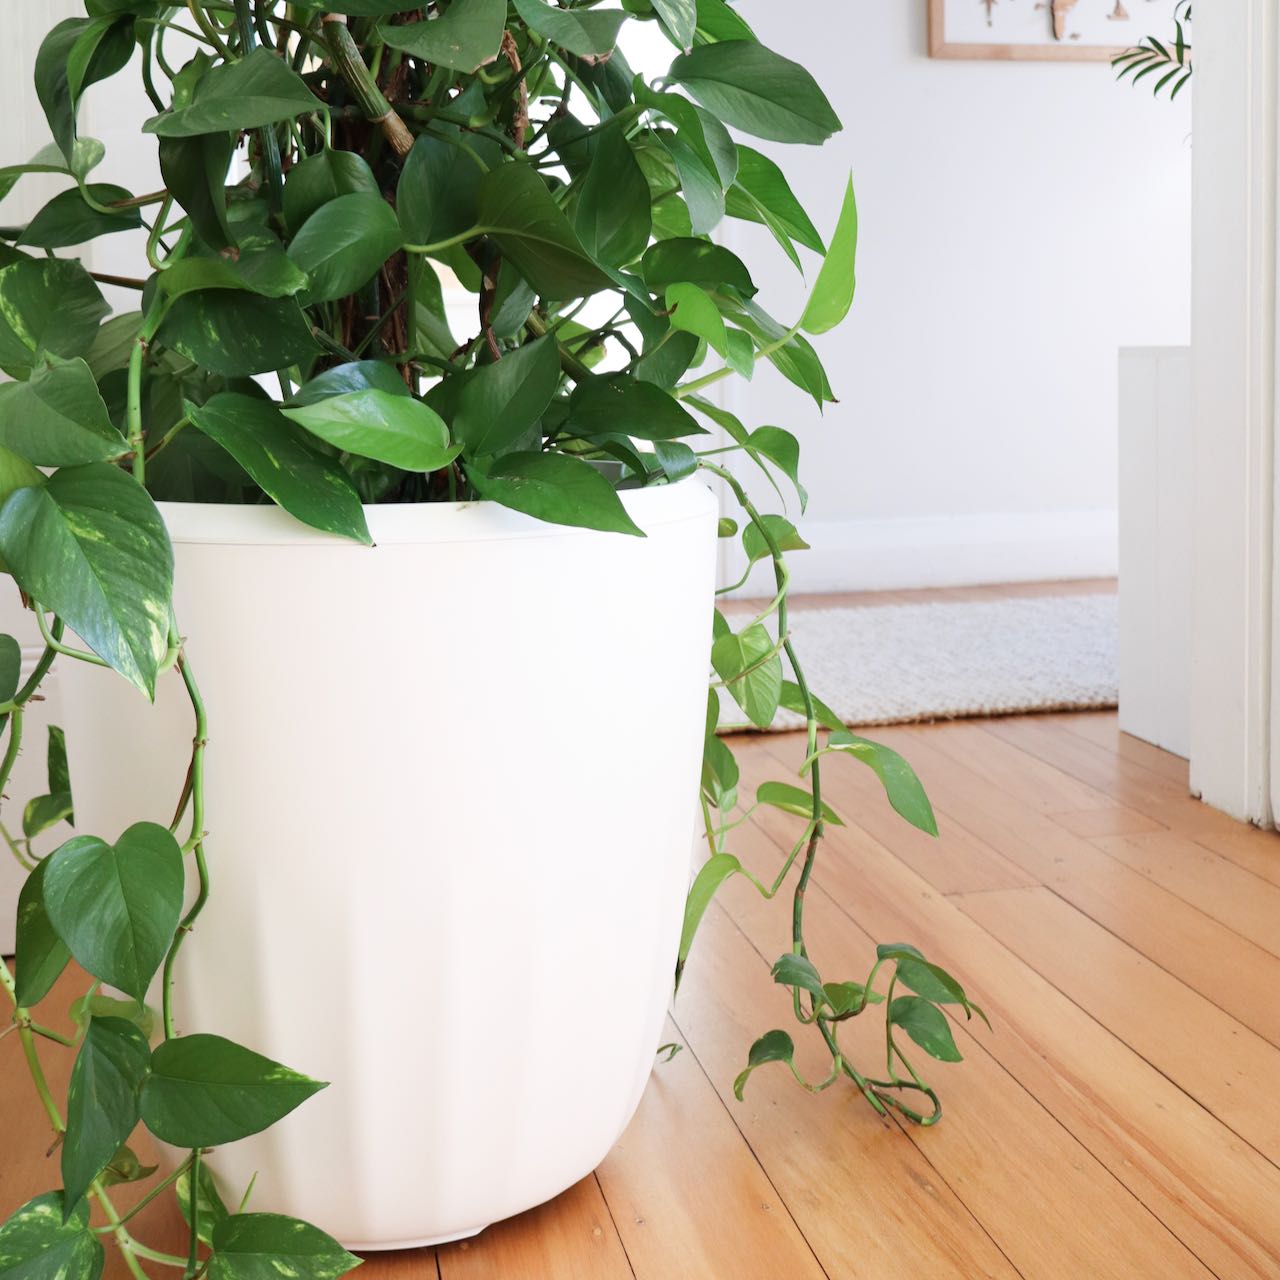 PerkyPod large white plant pot with green ivy houseplant trailing over the edges. Living room on wooden floorboards. Large indoor plant.